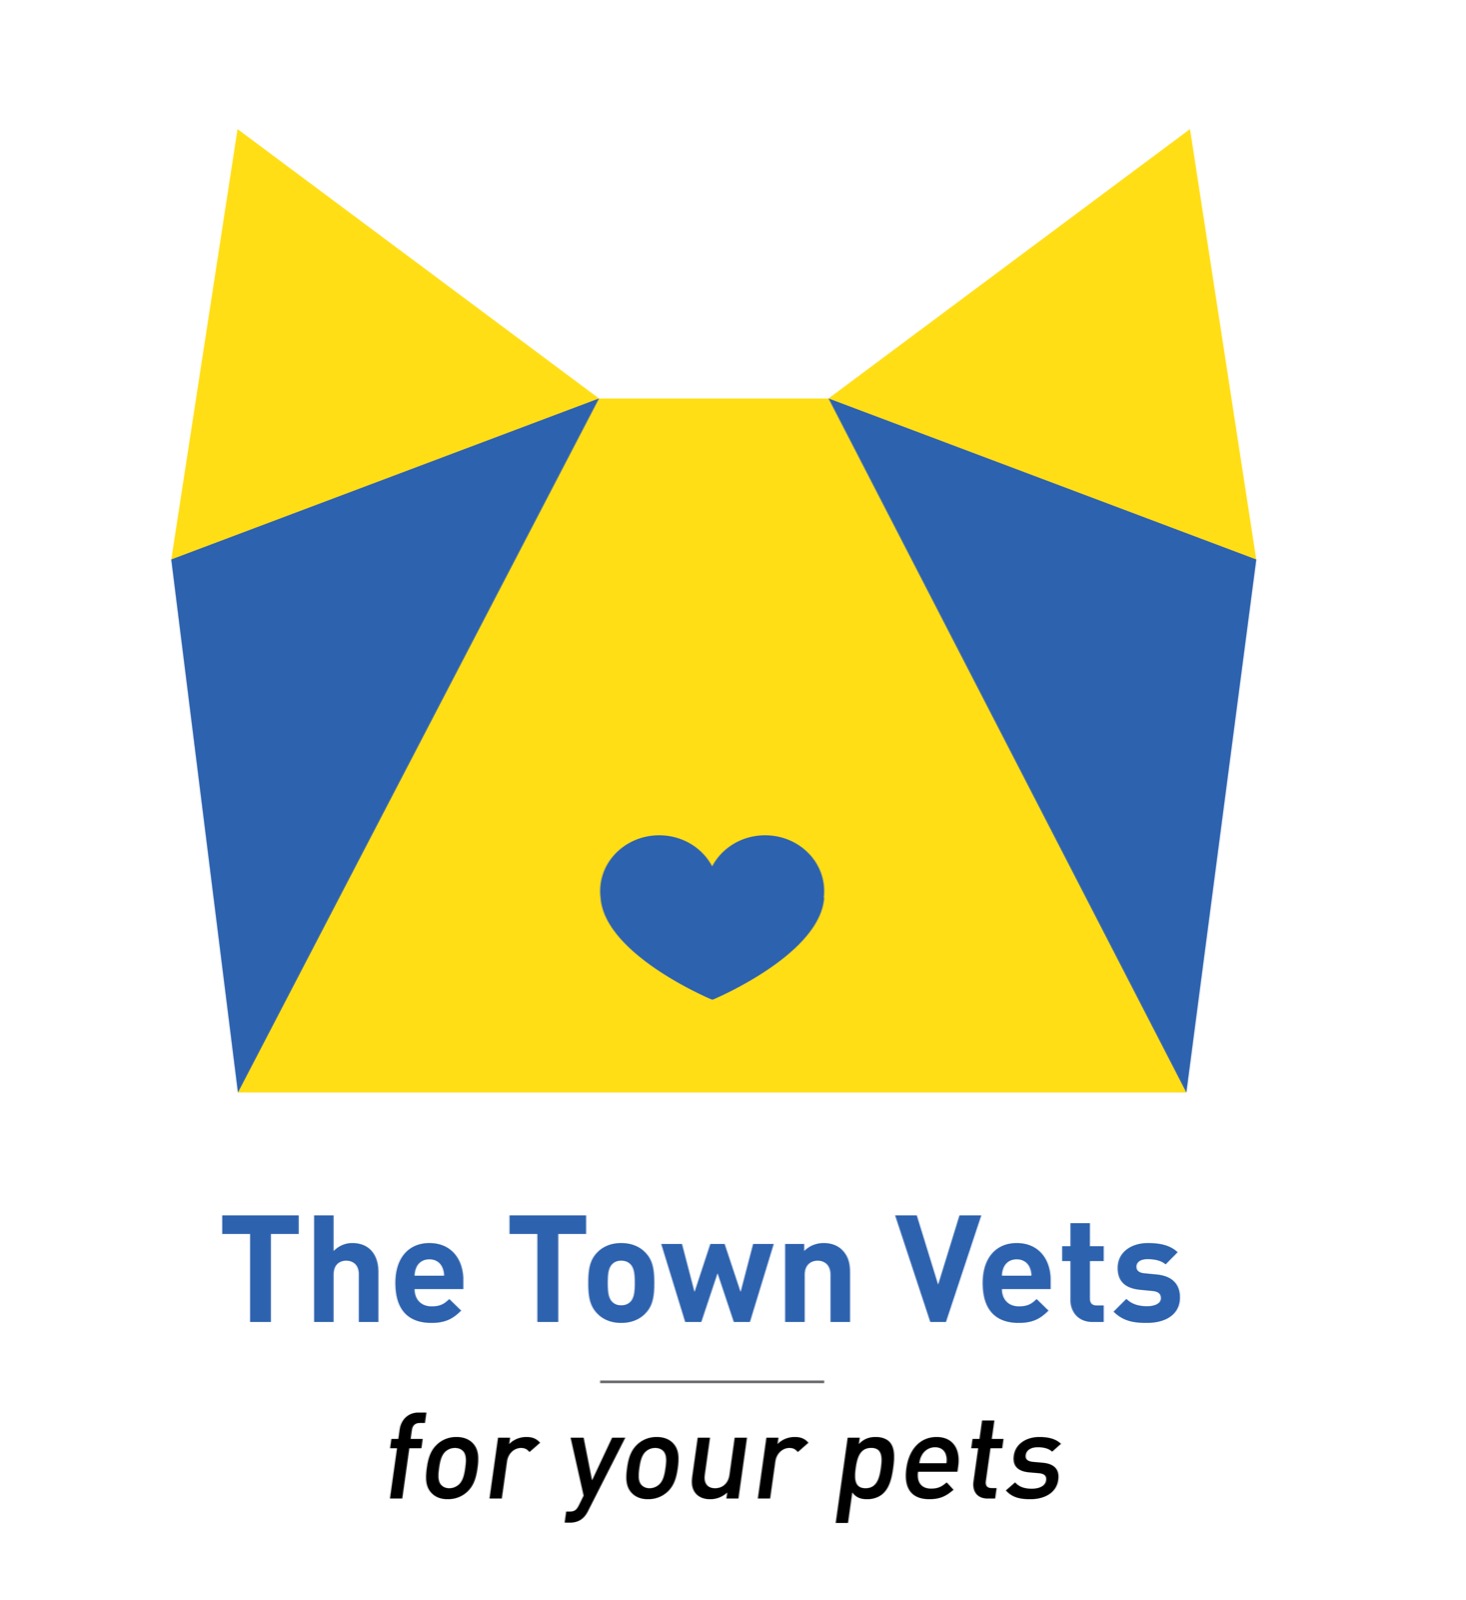 The Town Vets